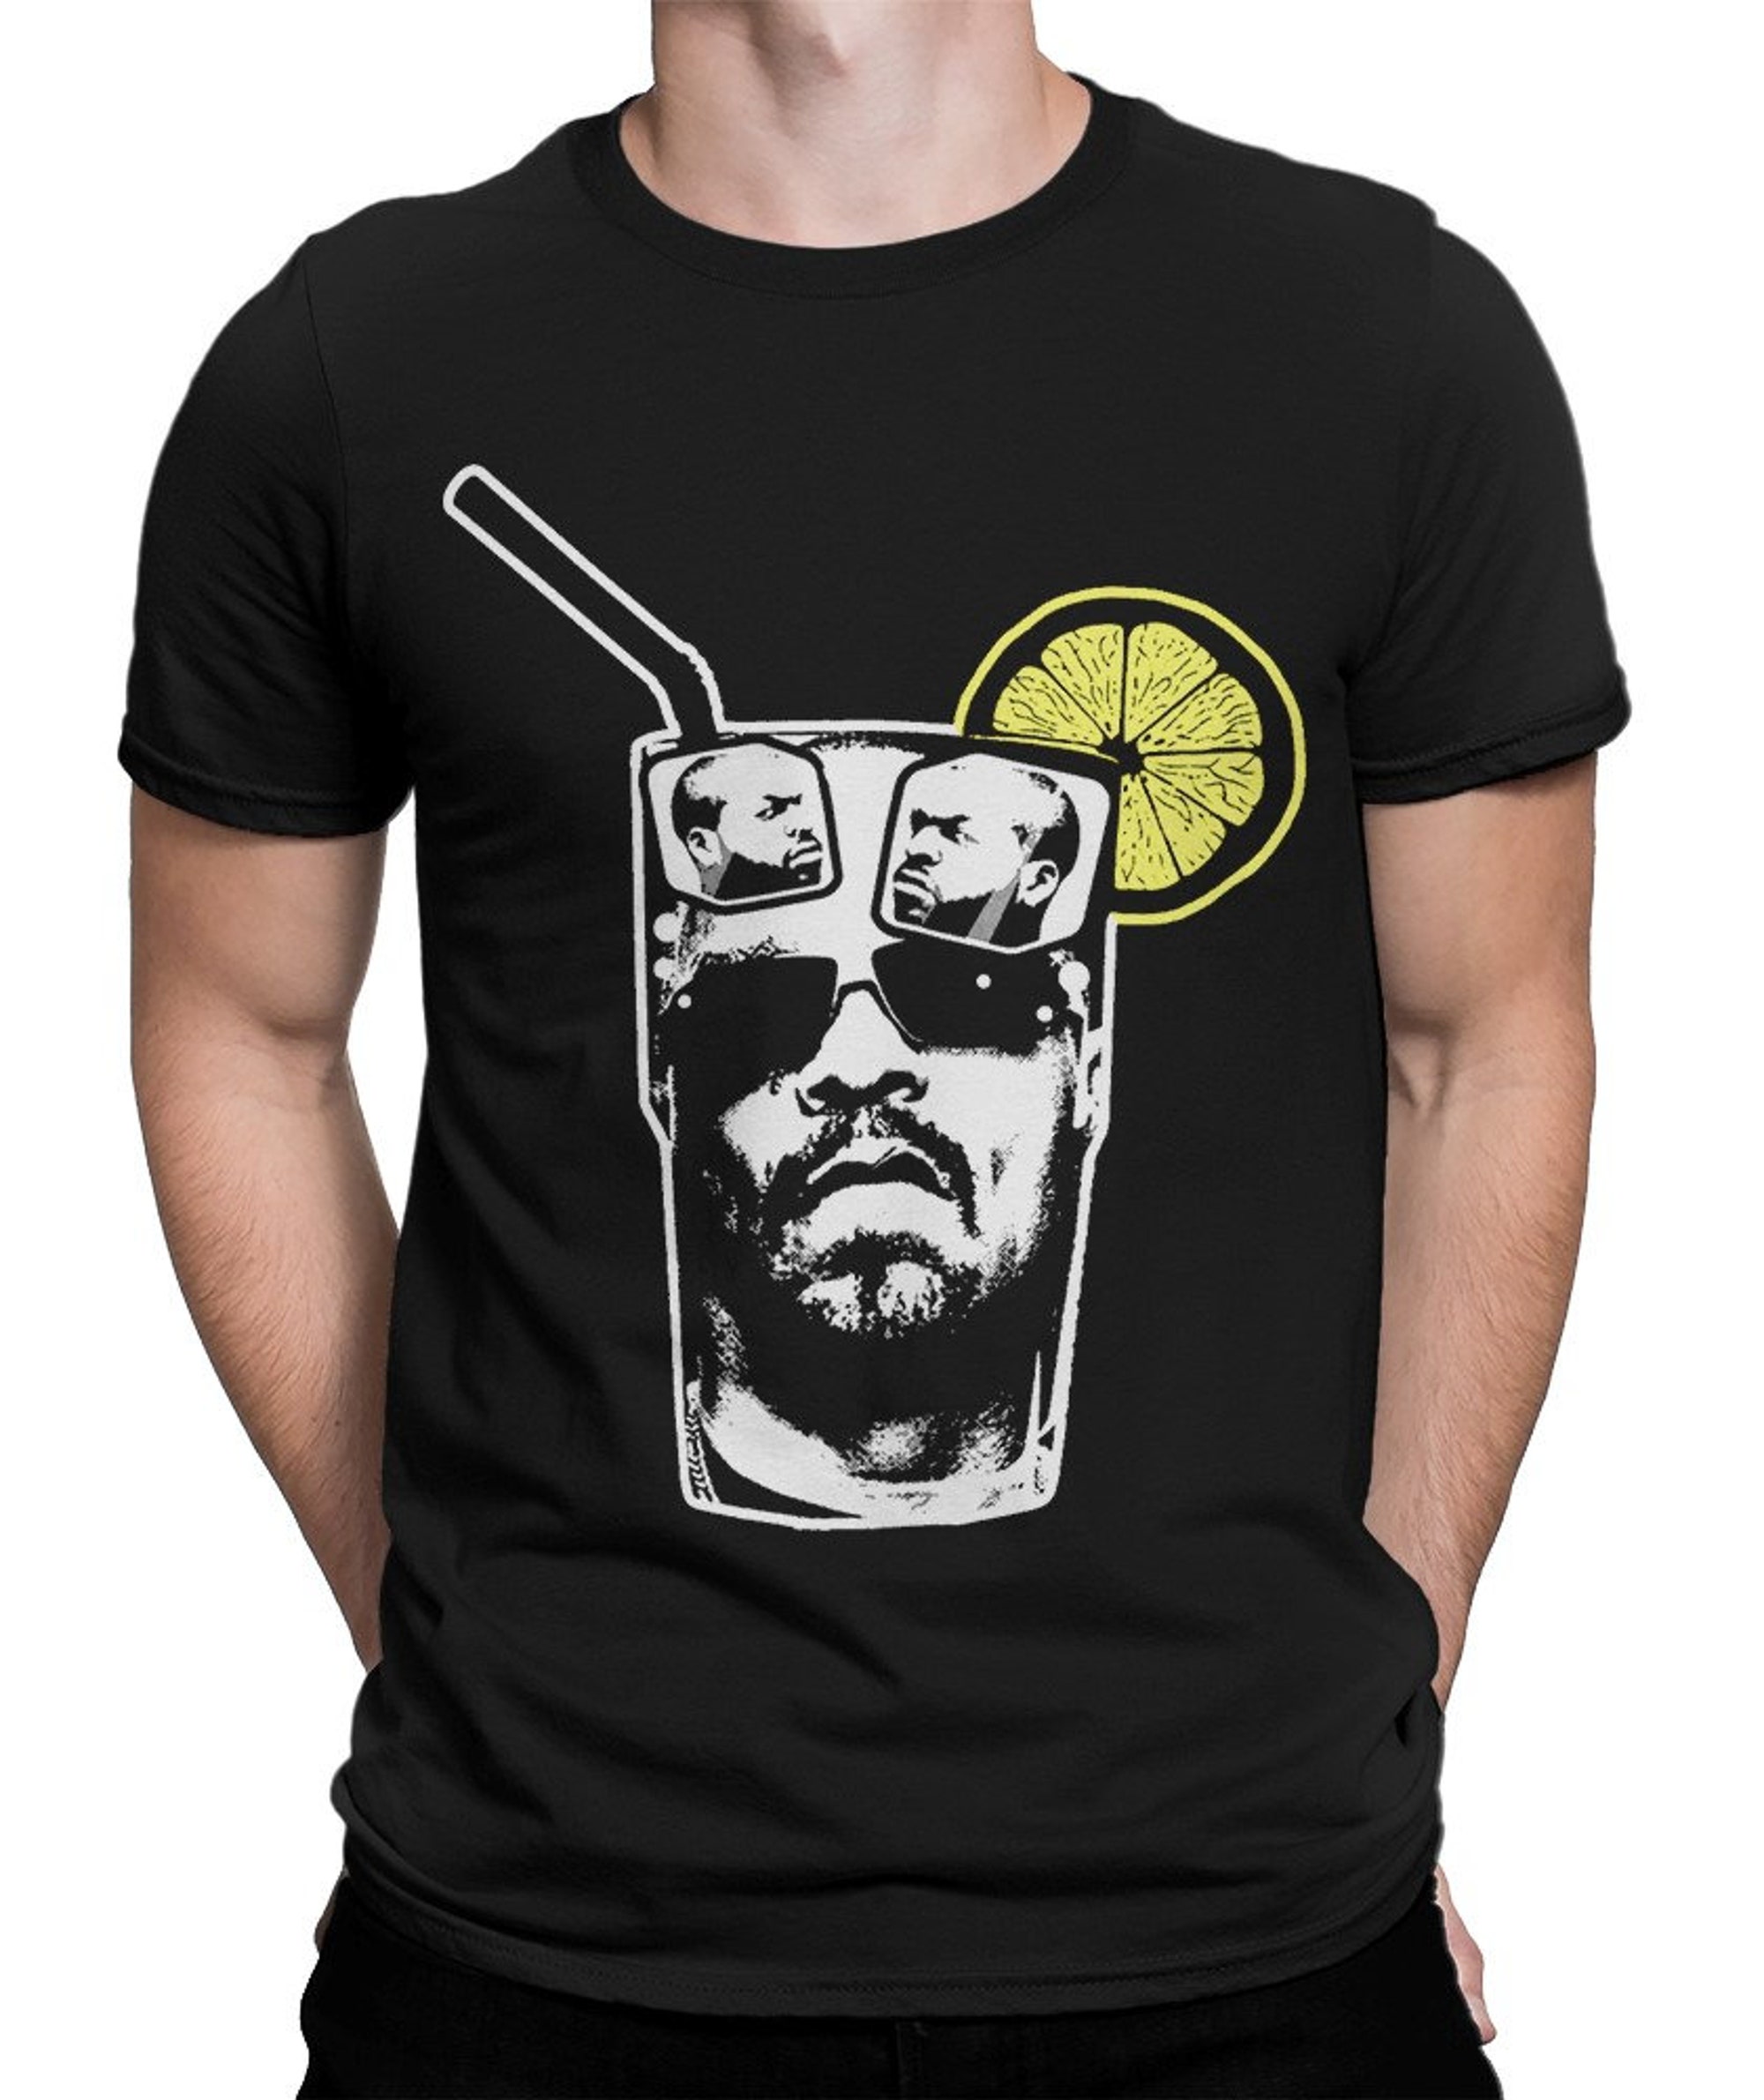 Discover Ice T with Ice Cube T-Shirt / Men's Women's Graphic Tee / 100% otton T-Shirt (wr-236)